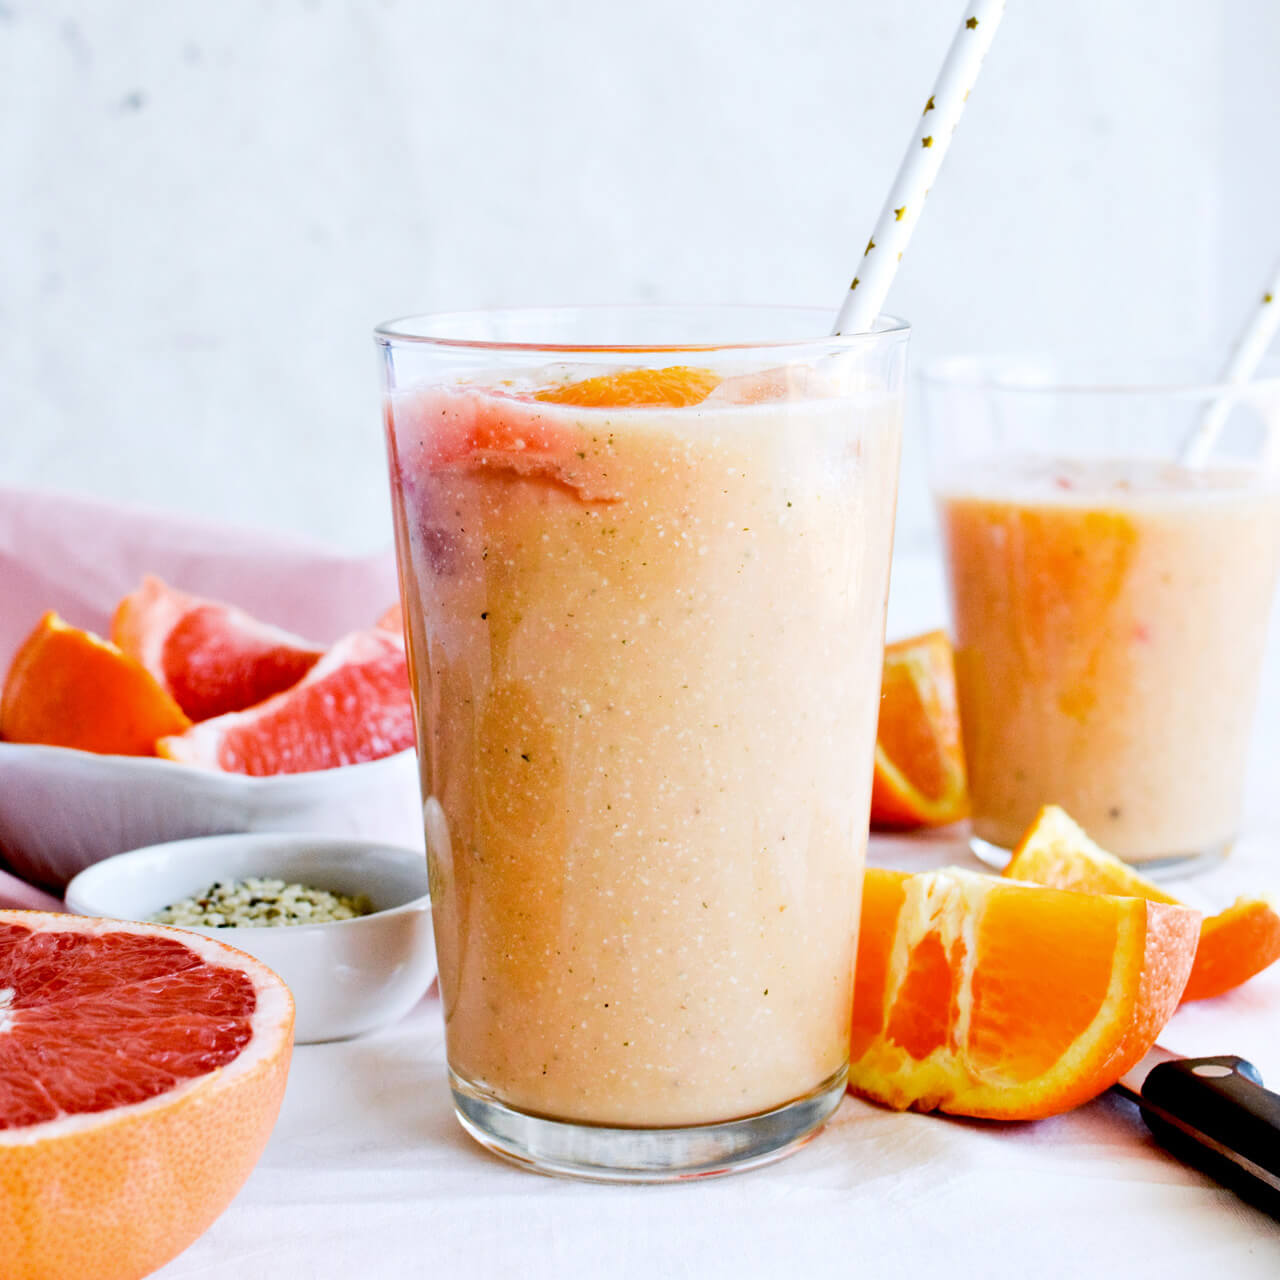 Vitamin C citrus power smoothie is an easy quick vegan smoothie, perfect for breakfast or snack.